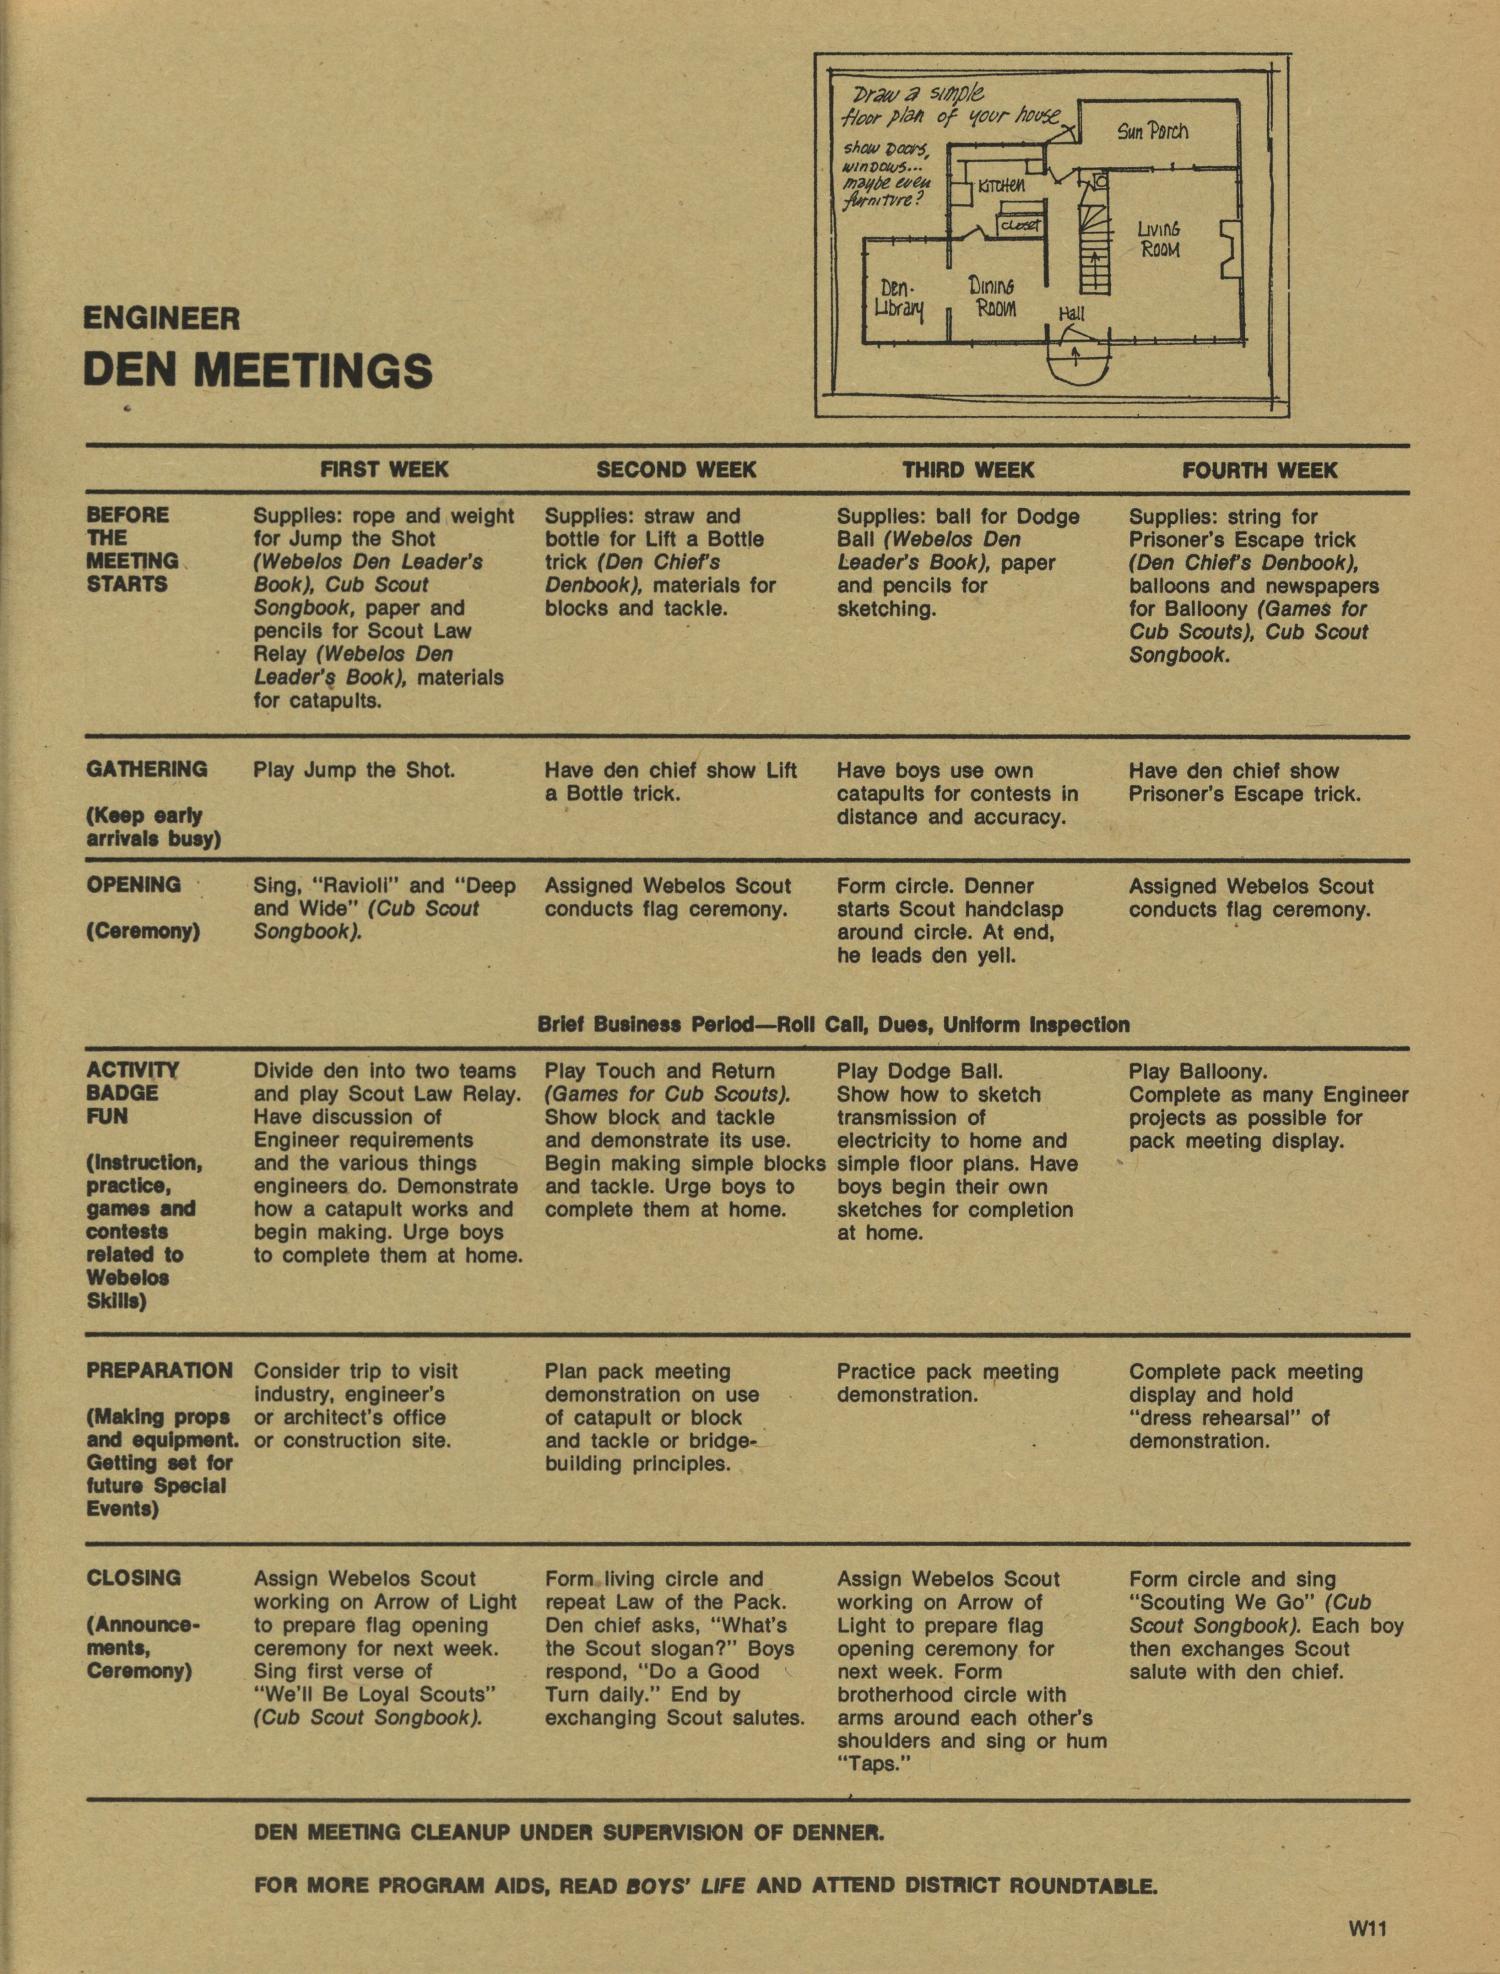 Scouting, Volume 62, Number 3, March-April 1974
                                                
                                                    11
                                                